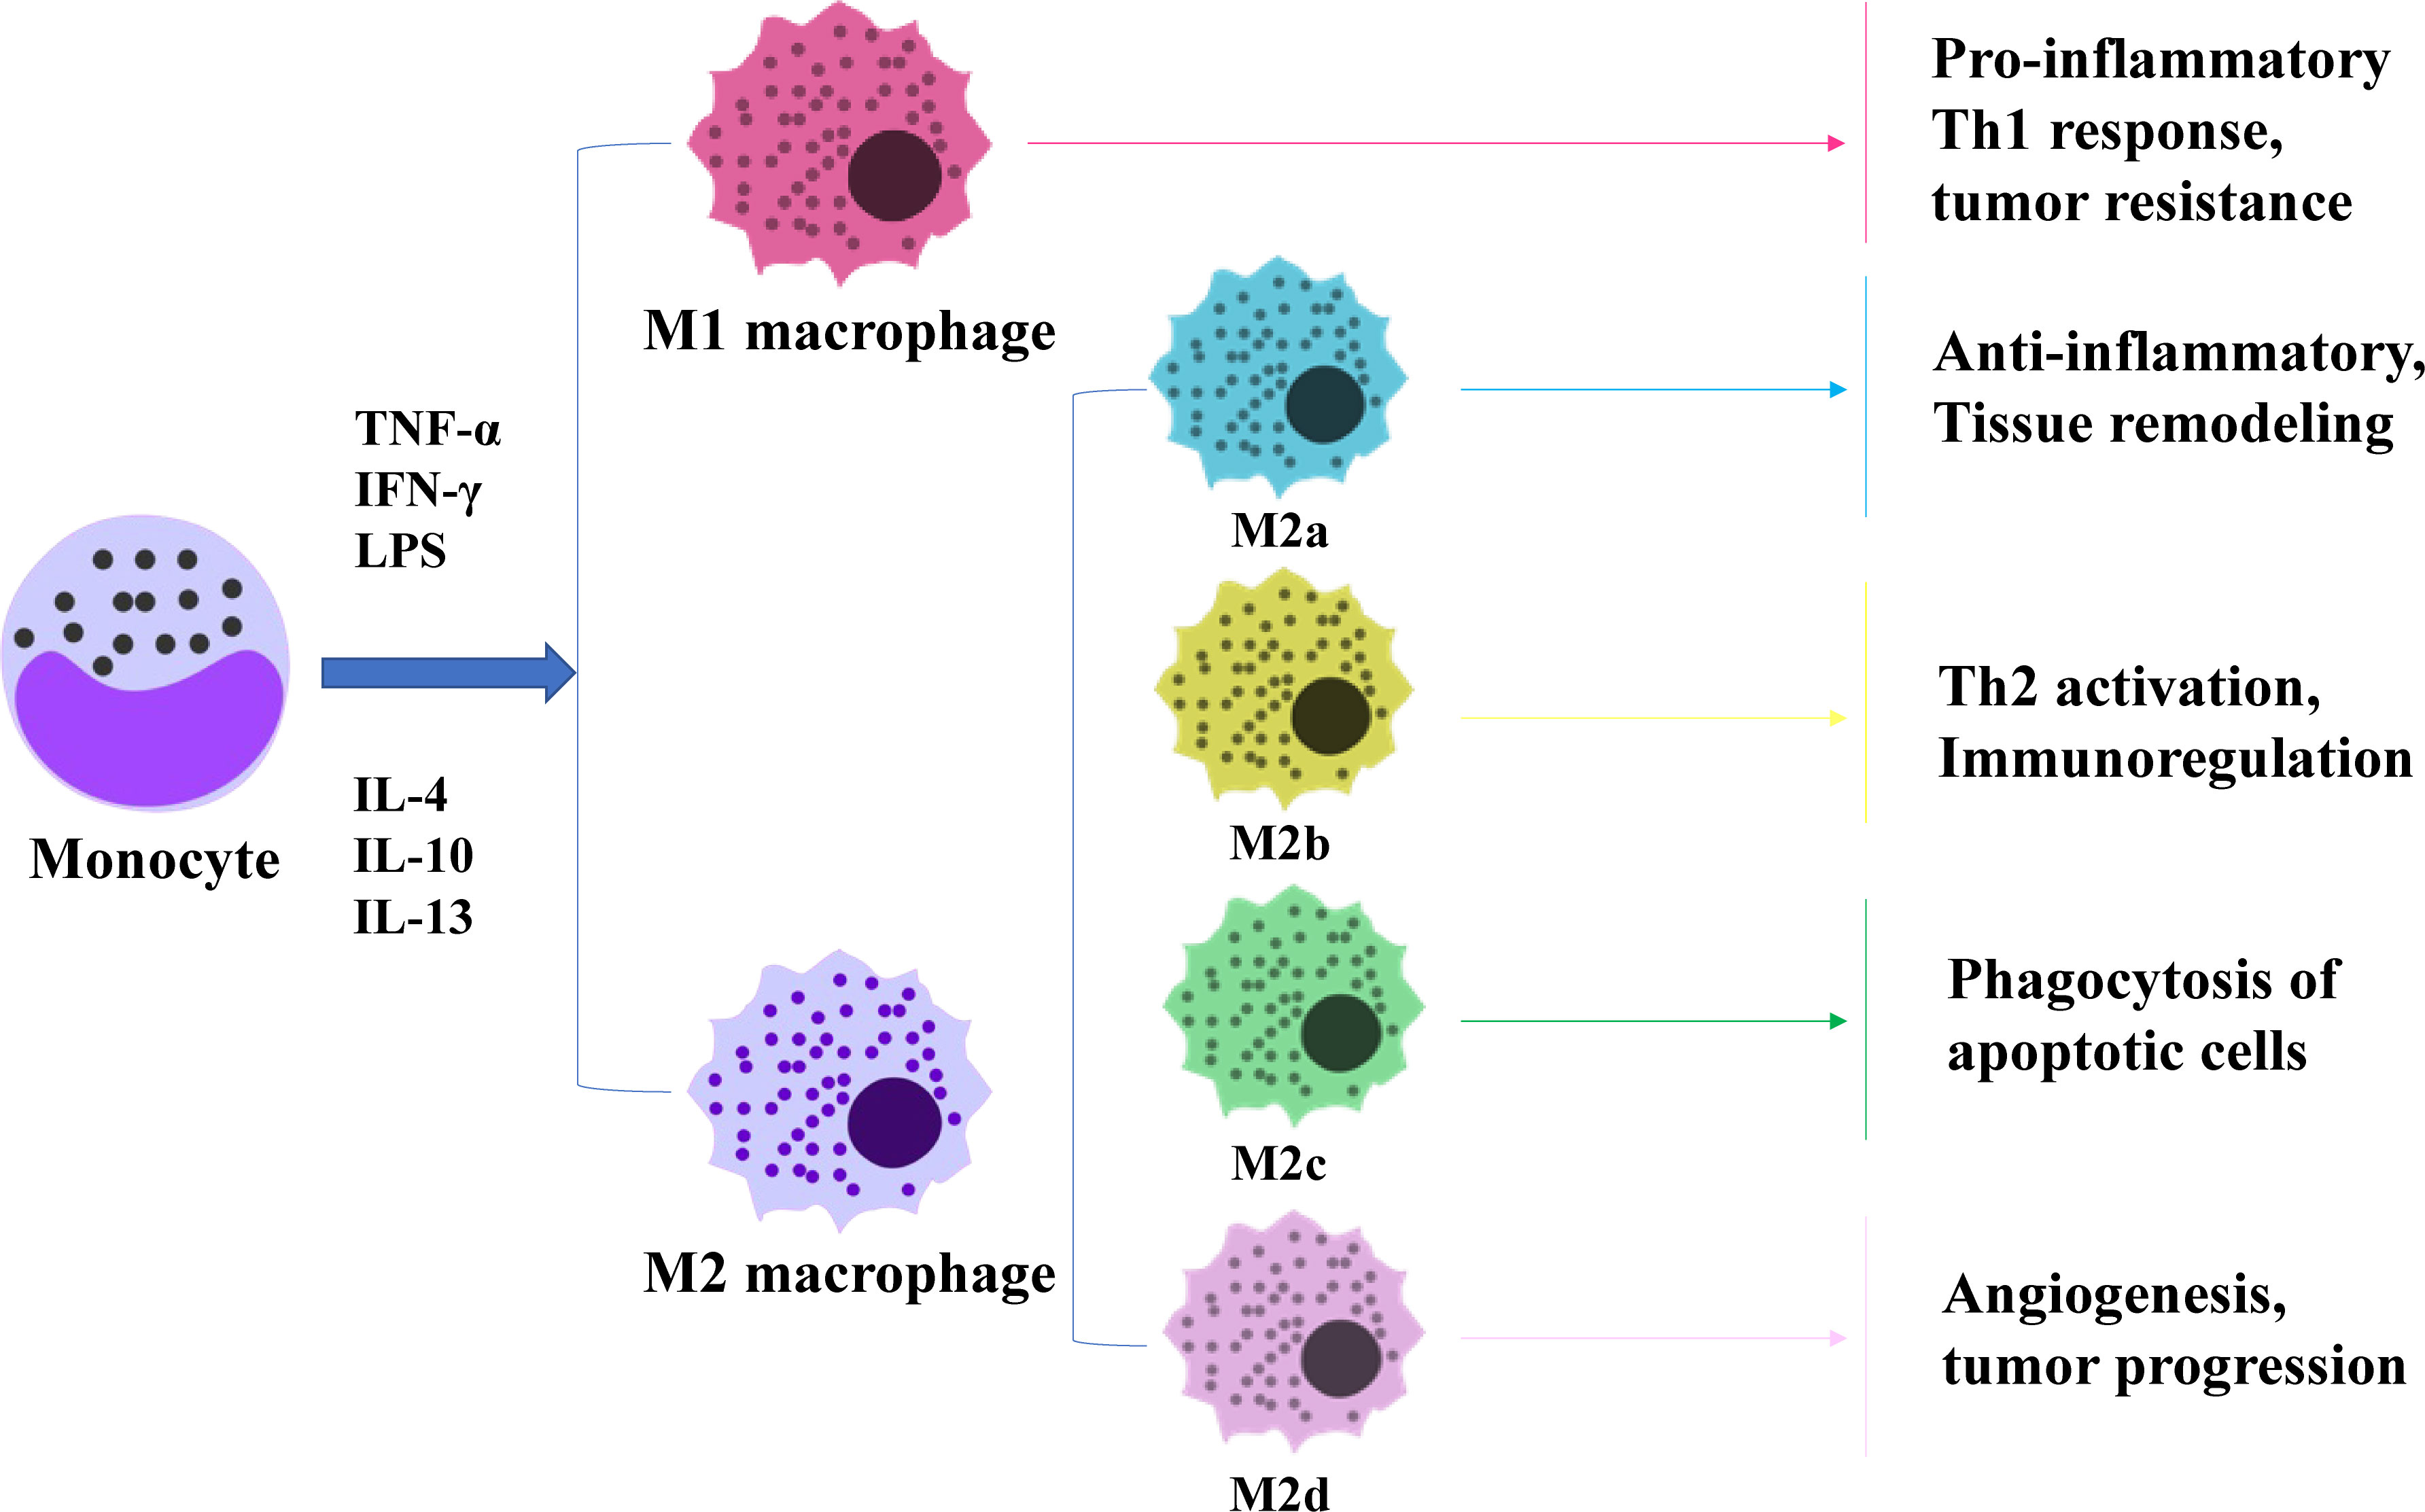 Frontiers | The role of macrophages in gastric cancer